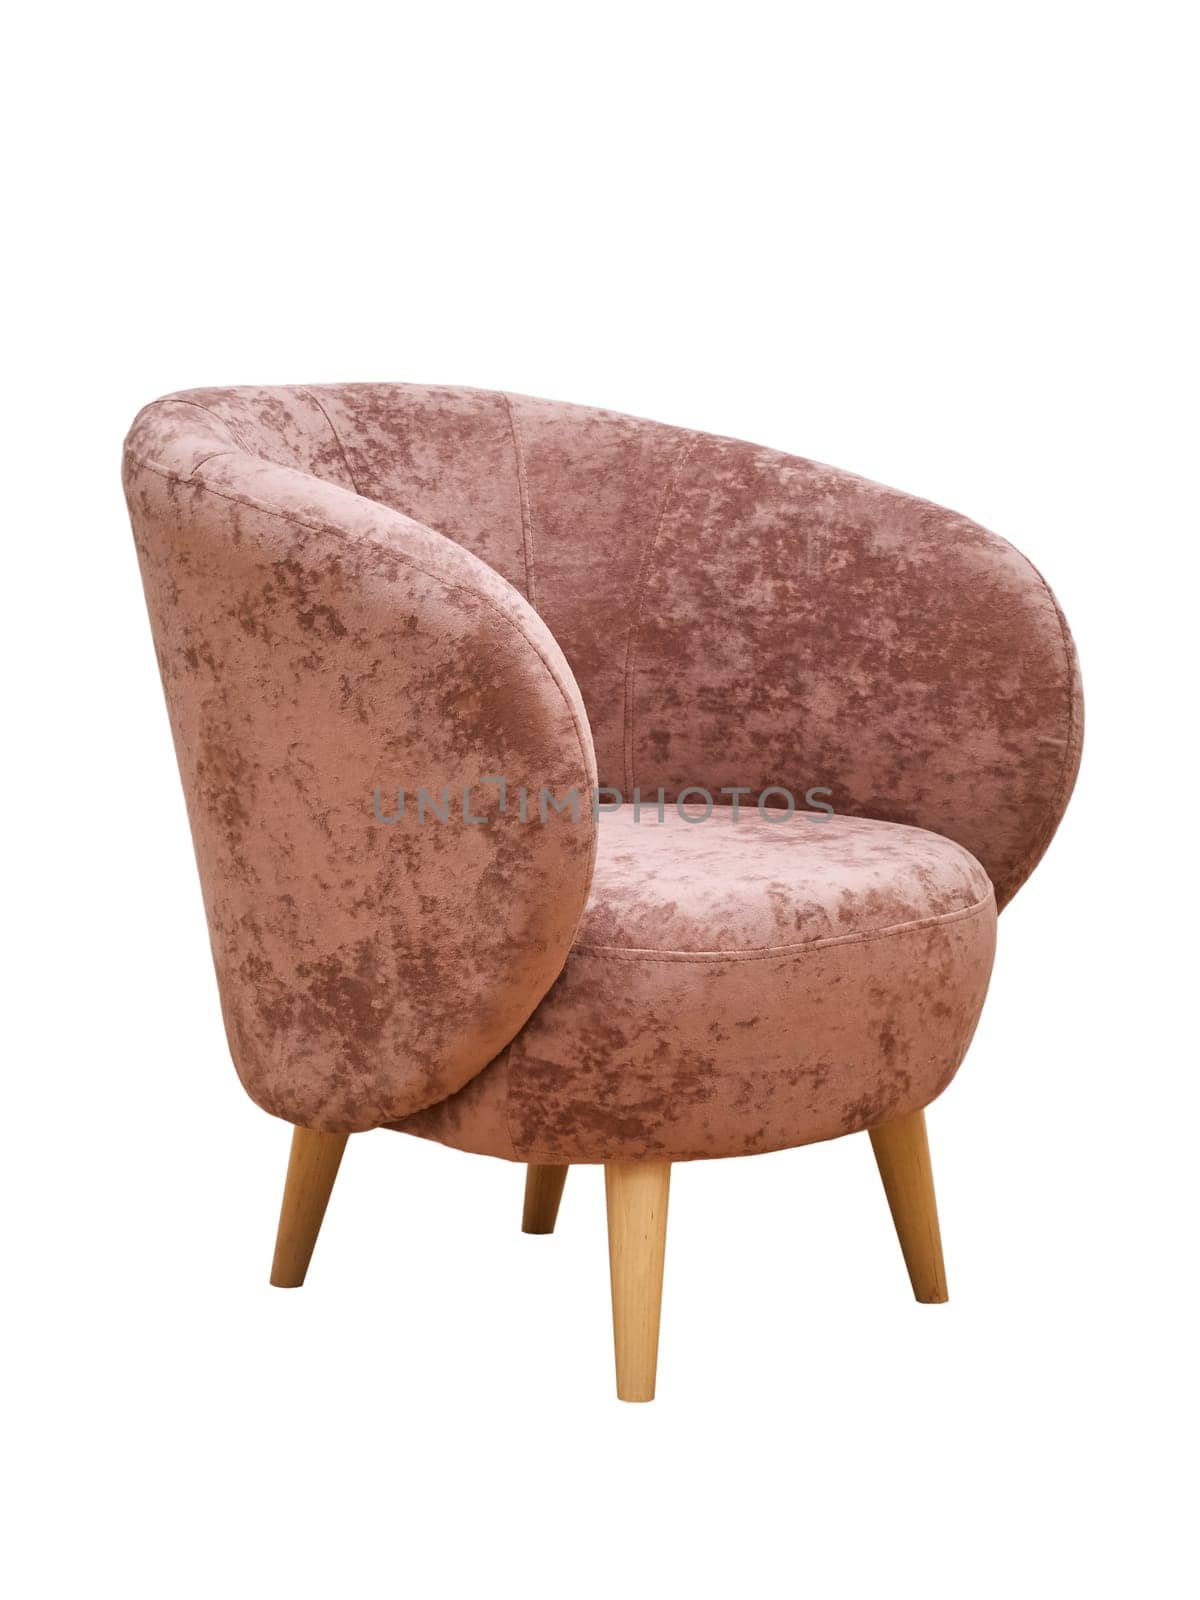 Modern pink fabric armchair with wooden legs isolated on white background, side view. furniture, interior, home design in minimal style